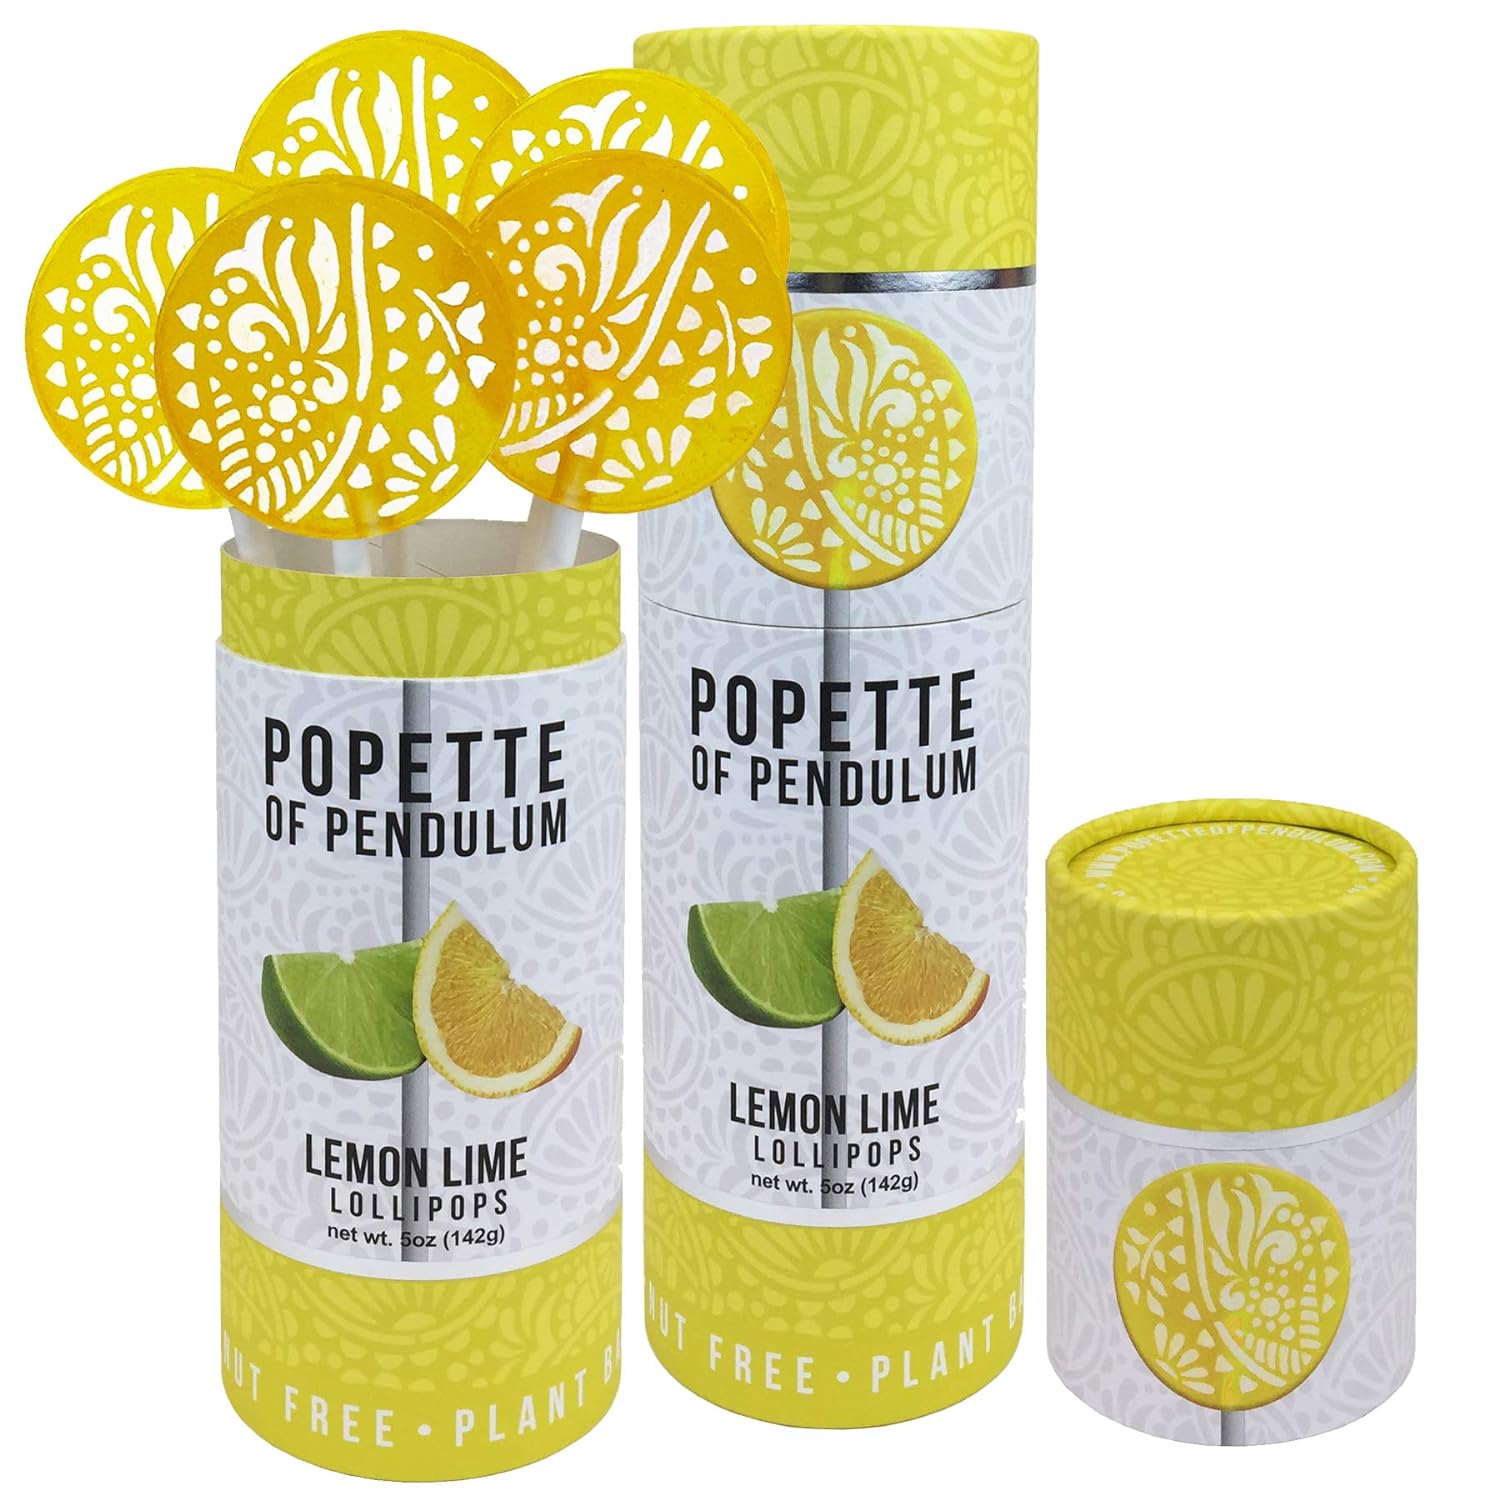  GLUTEN FREE PALACE Popette of Pendulum Vegan Lollipops | Stunning Christmas Lollies | Gluten Free, Xmas Thanksgiving Decorative Large Lollipops | Individually Wrapped B-day Treat In a Canister [ 2 pa